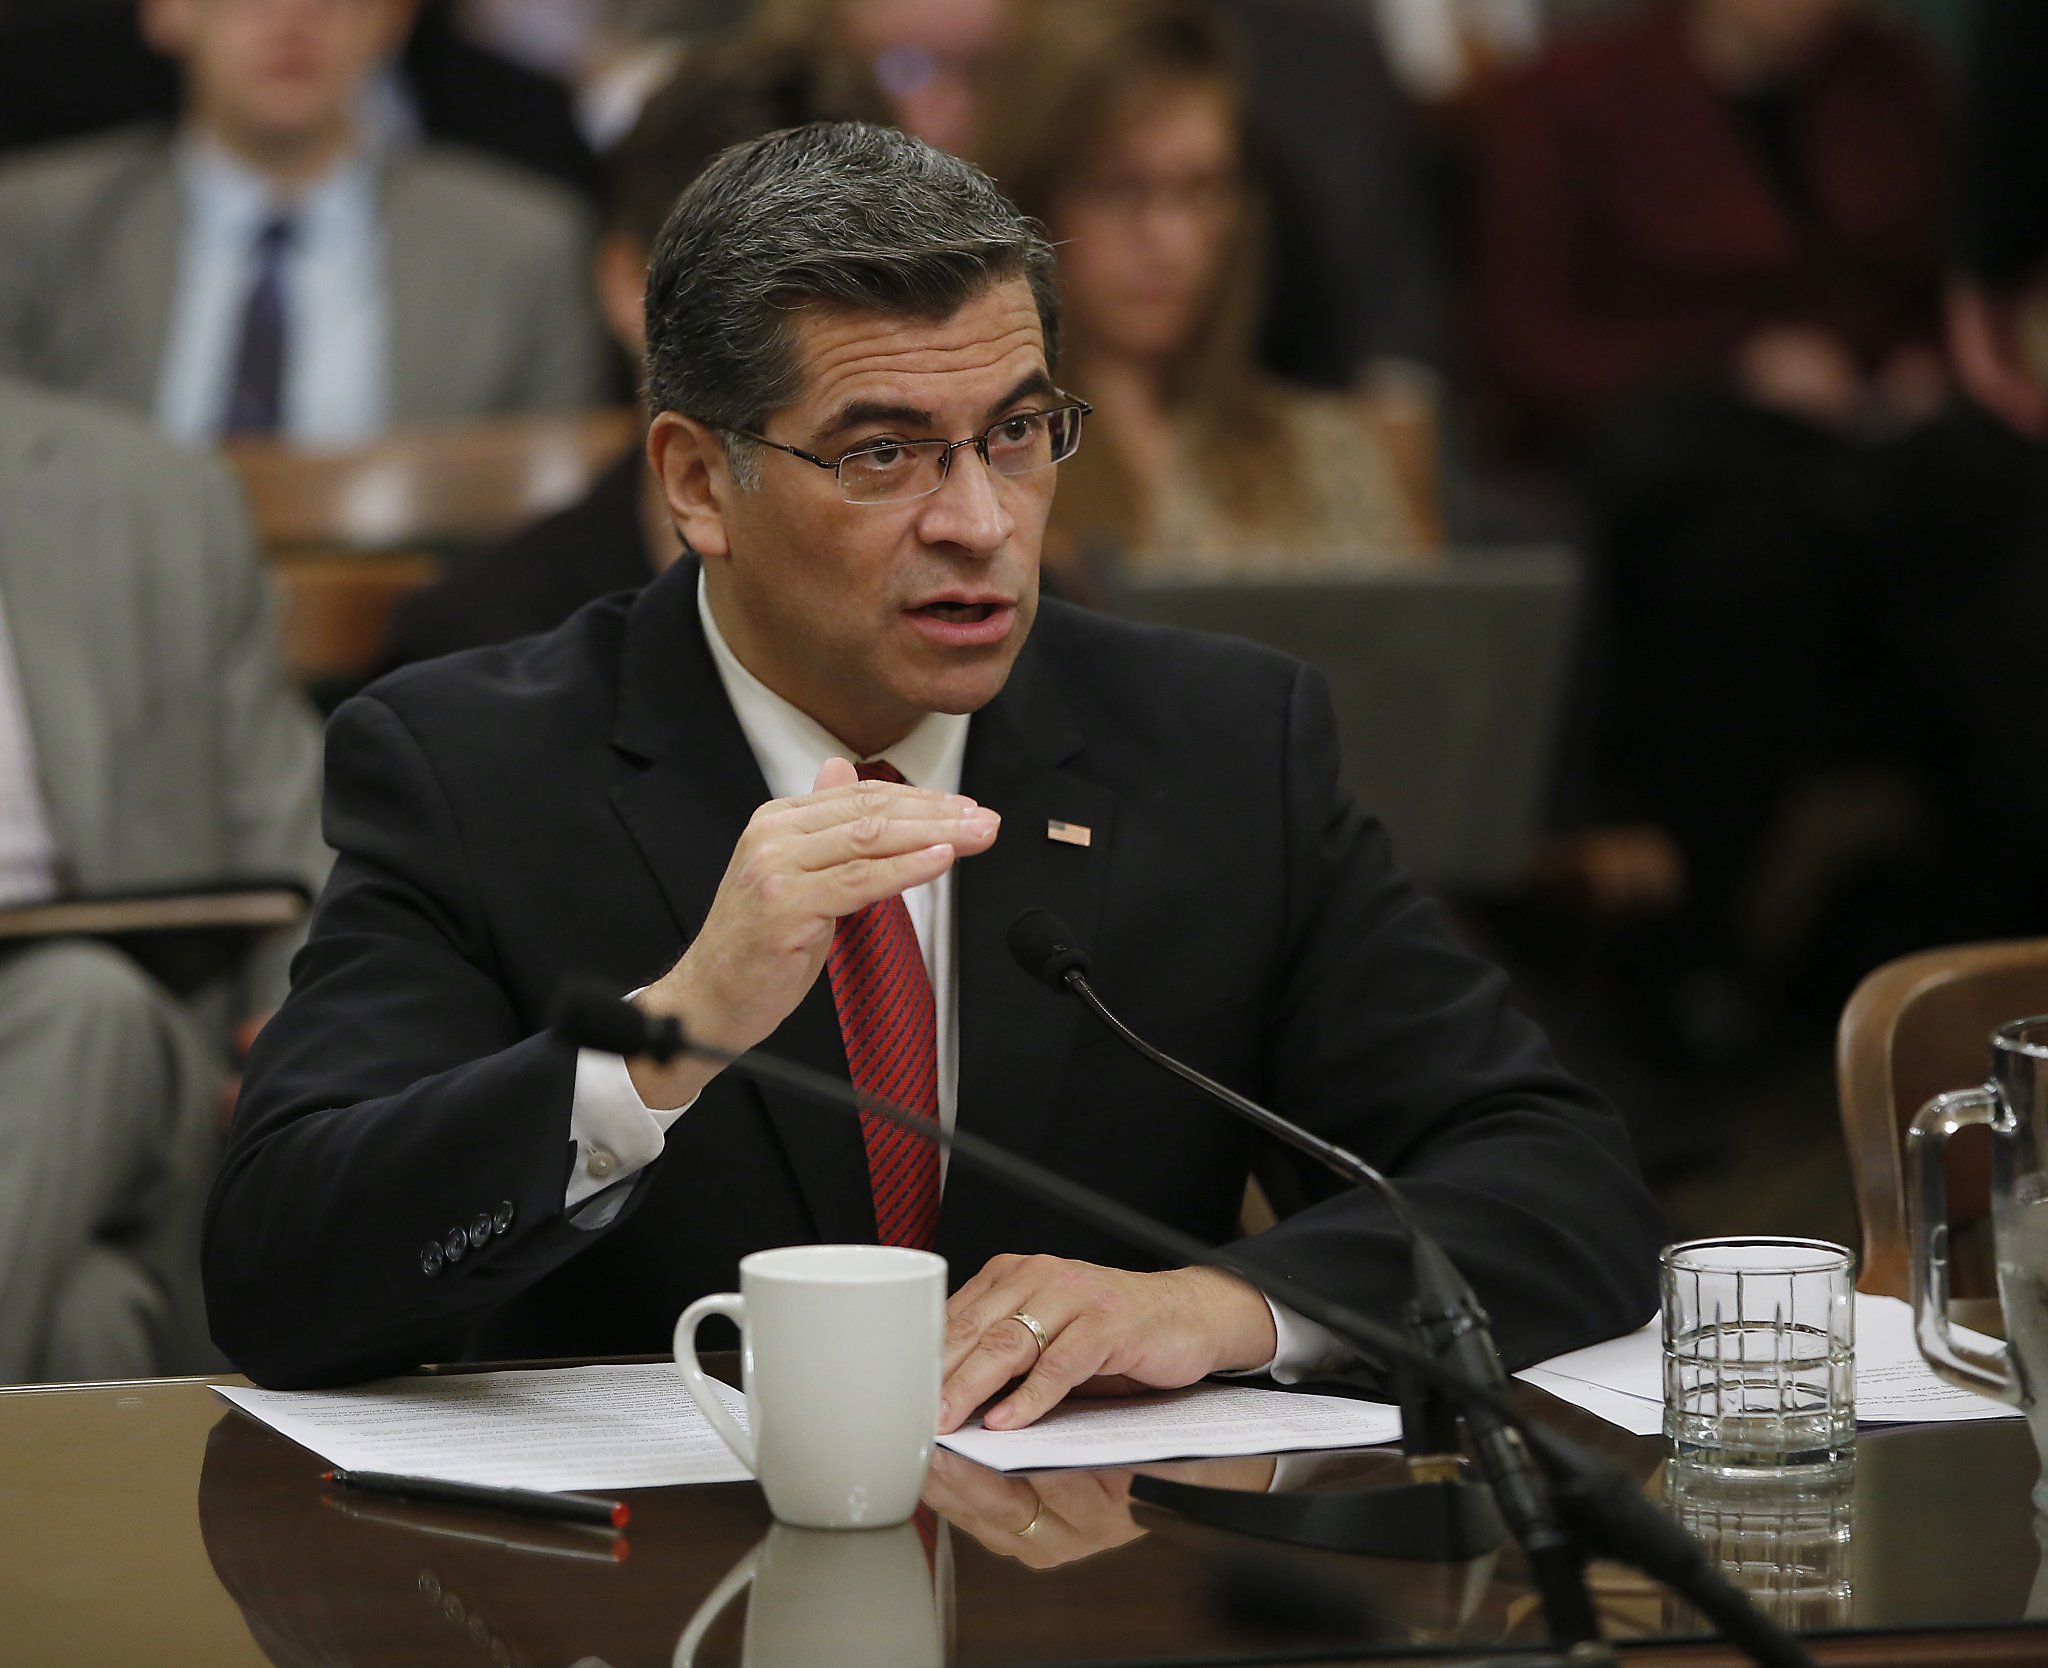 Xavier Becerra primed to defend state values as attorney general - San Francisco Chronicle